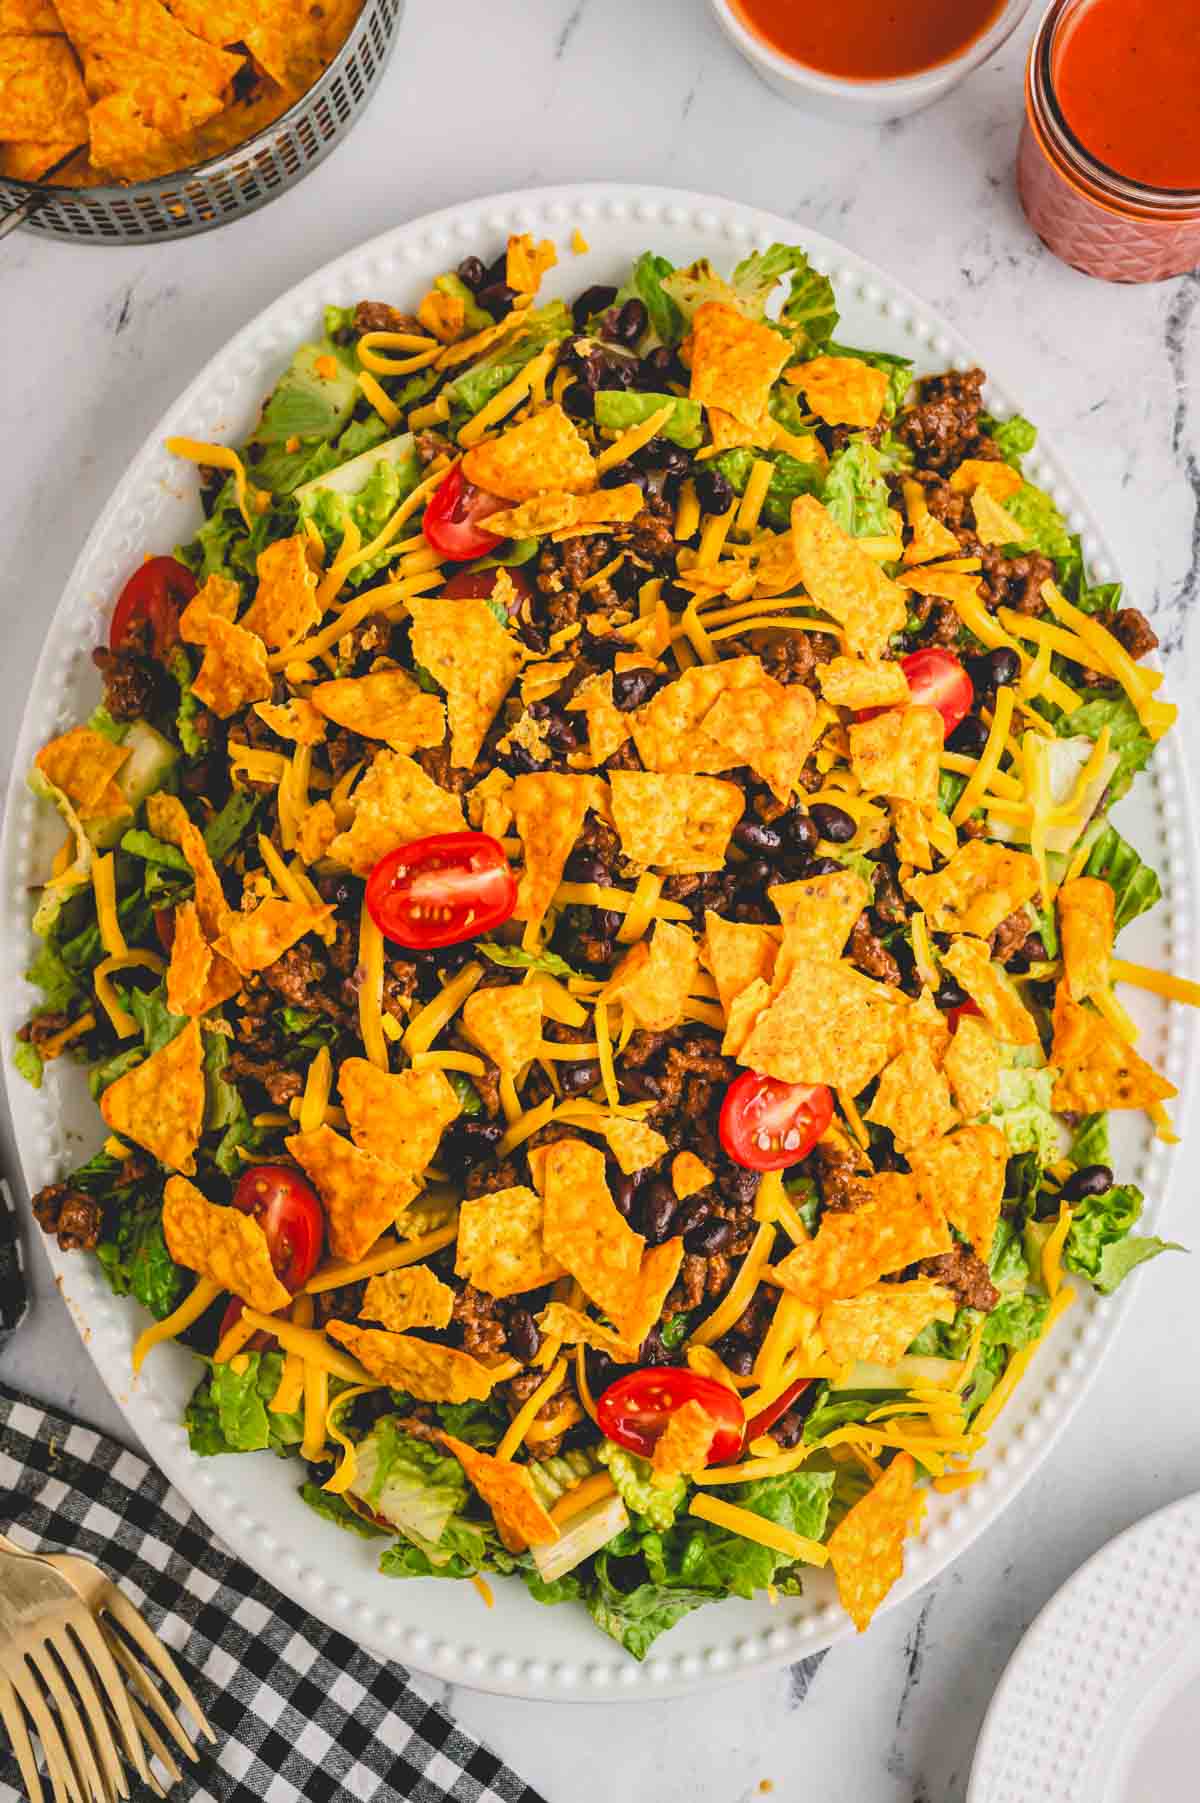 A platter of Dorito taco salad with chips, condiments, and serving utensils on the side.